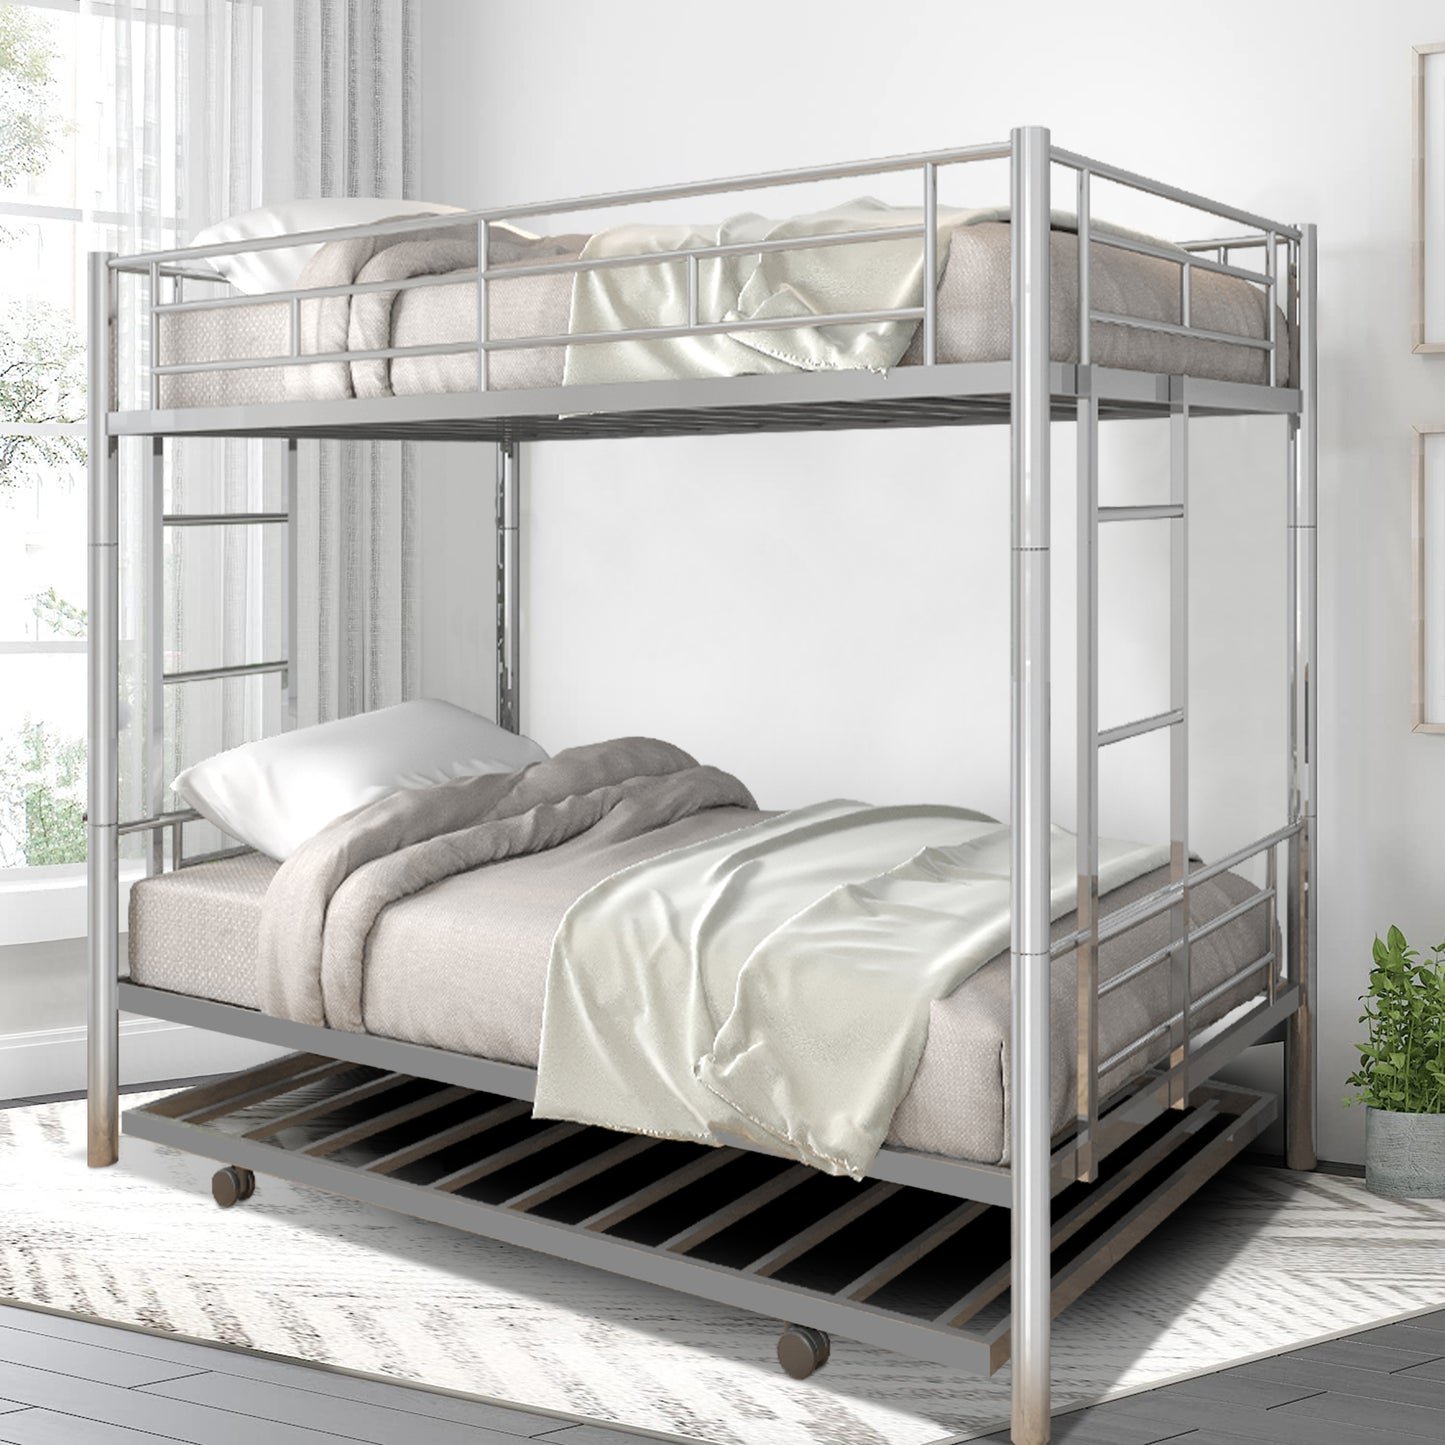 Twin over Twin Bunk Bed Frame with Trundle, SYNGAR Upgraded Bunk Beds with Ladder & Guardrail, Heavy Duty Kids Bedroom Furniture Bunk Bed for Boys and Girls, Space Saver Guest Room Bunk, Silver, C24